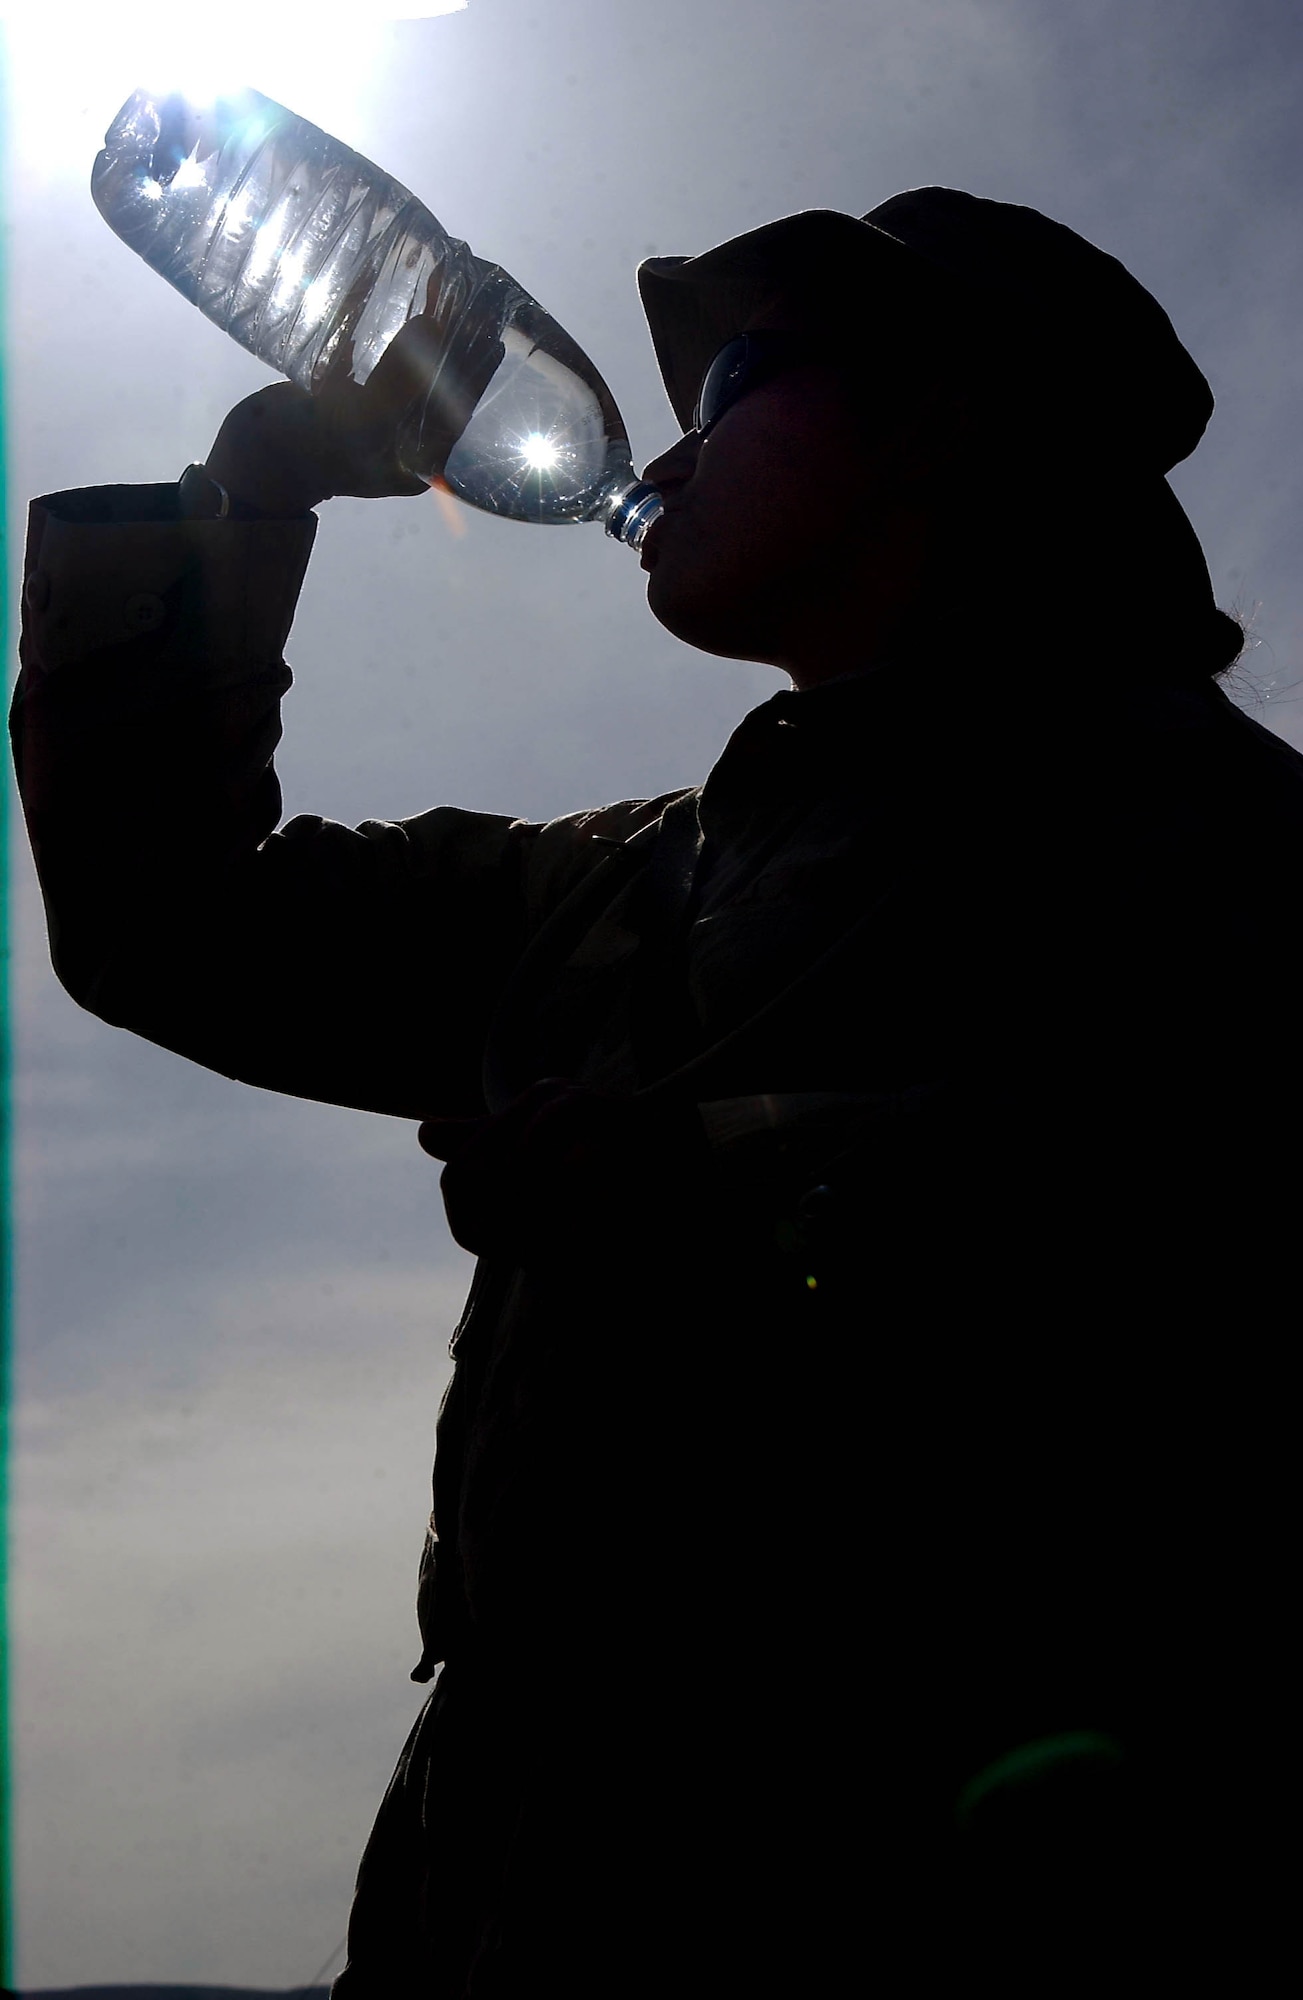 OPERATION IRAQI FREEDOM -- Staff Sgt. Sabrina Hauser takes a long drink of bottled water at Bashur Airfield in northern Iraq.  Drinking bottled water keeps the risk of disease down.  Hauser is a videographer with the 1st Combat Camera Squadron at Charleston Air Force Base, S.C.  (U.S. Air Force photo by Master Sgt. Keith Reed)